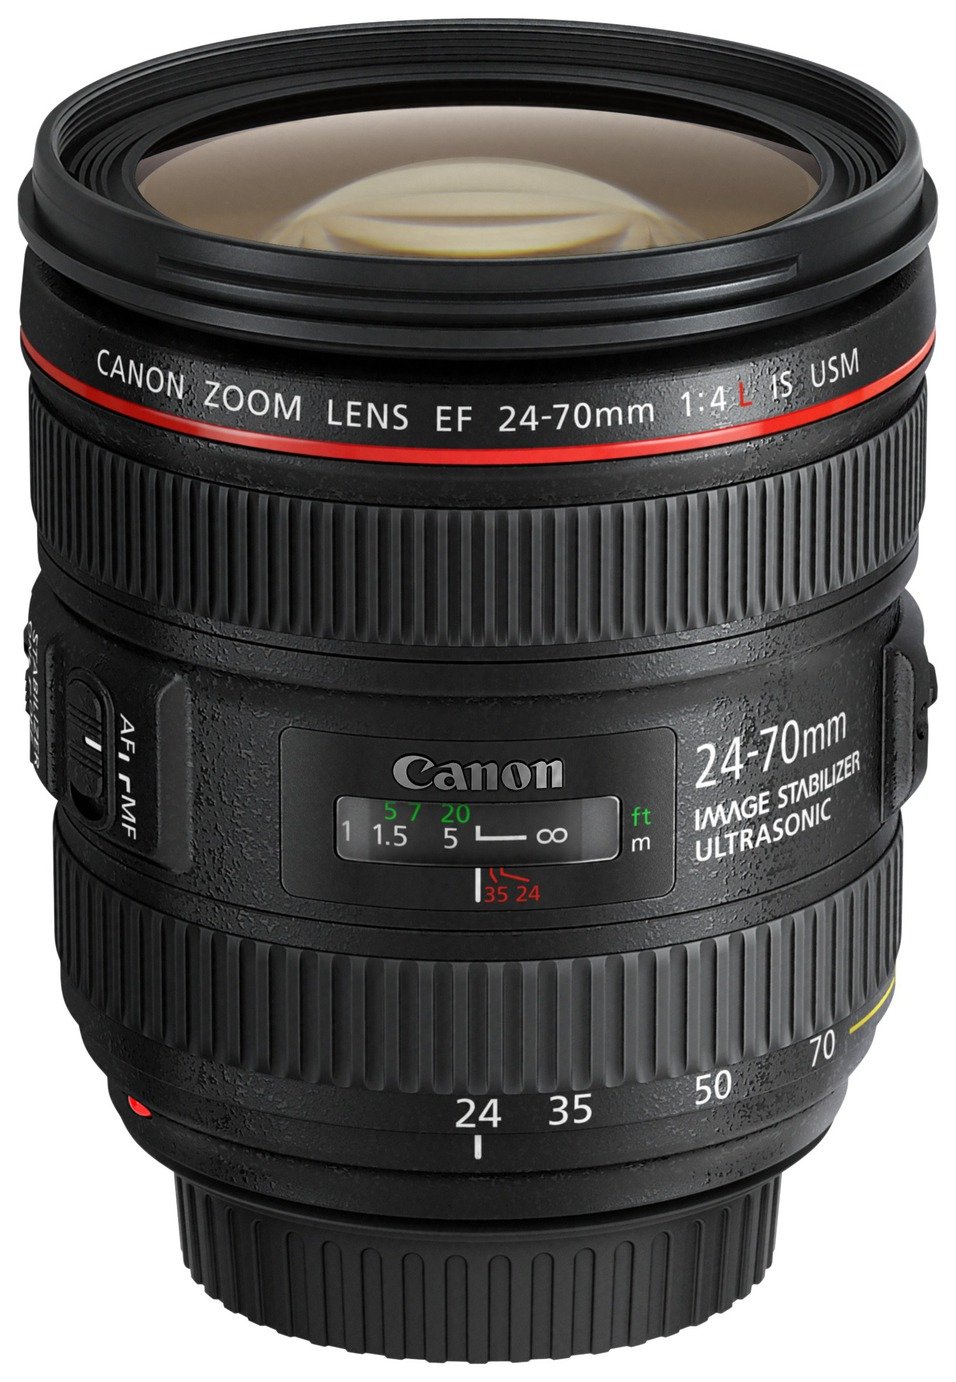 Canon EF 24-70mm f/4L IS USM Lens Review